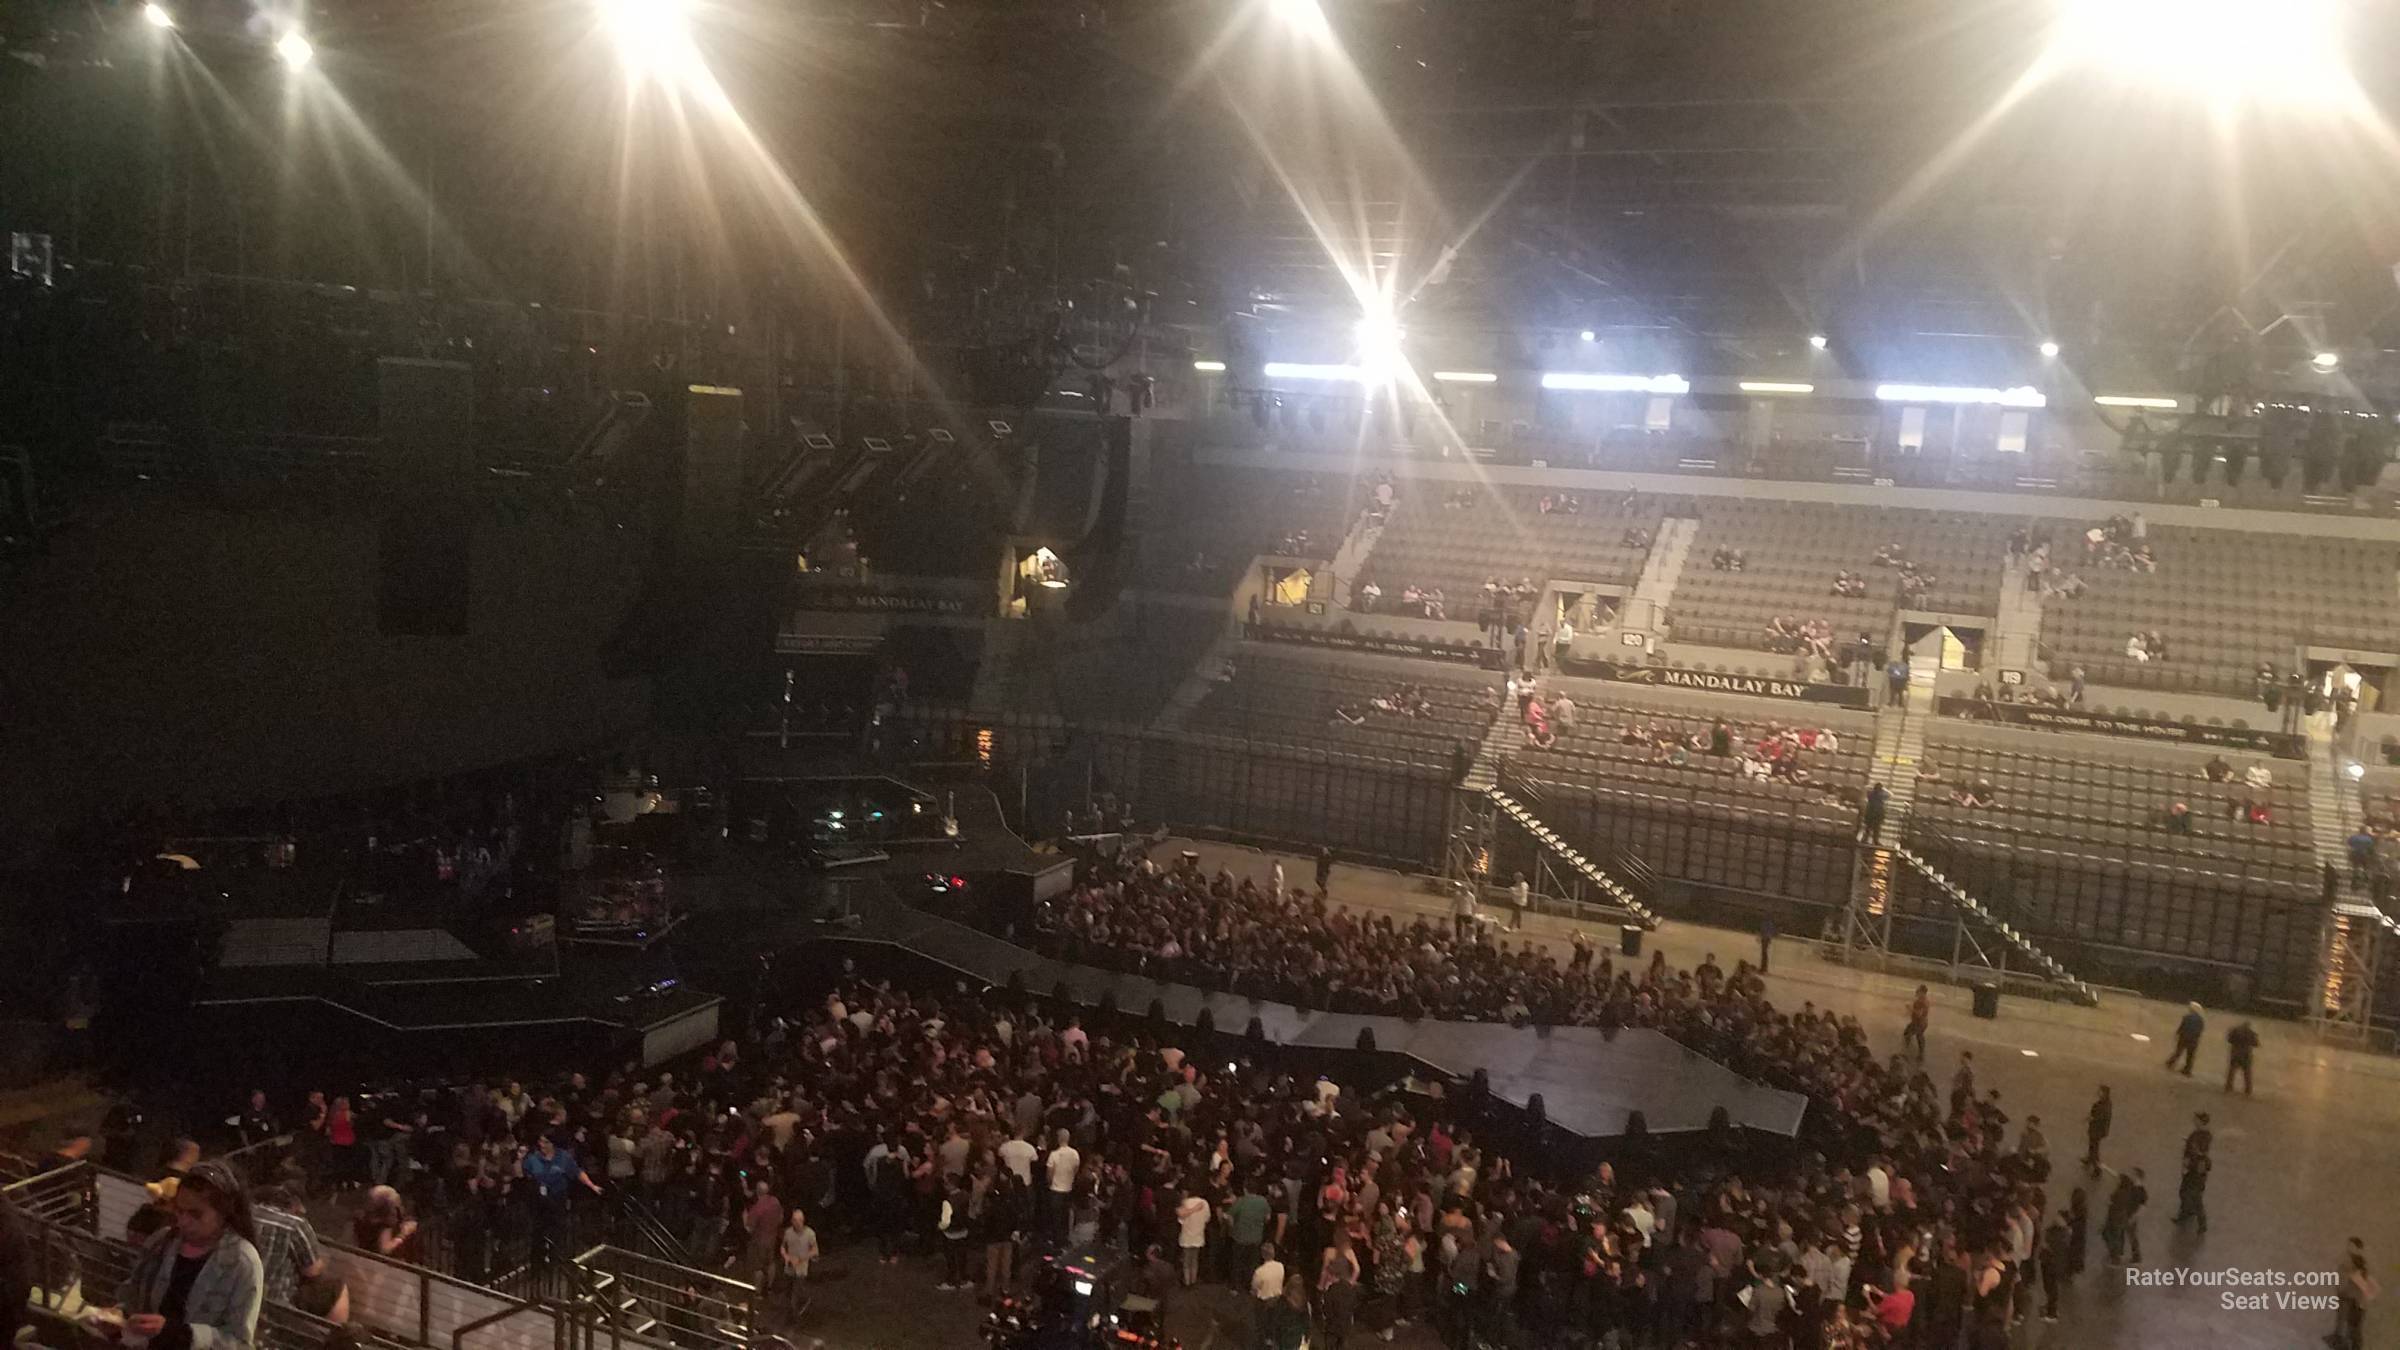 suite a seat view  for concert - michelob ultra arena